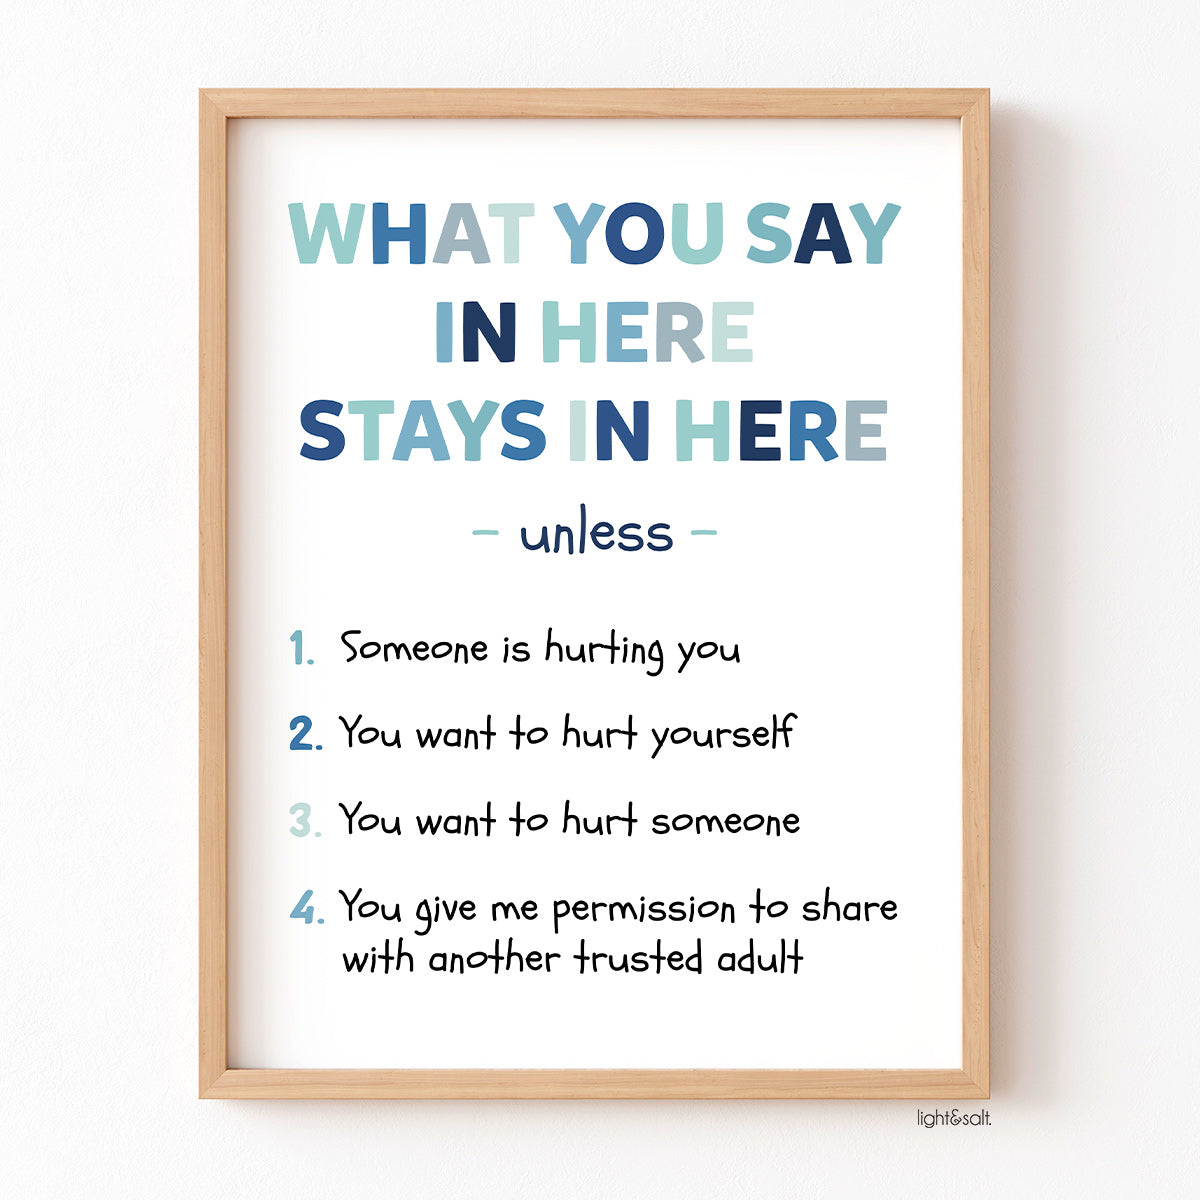 What you say in here stays in here, confidentiality poster, blue tones